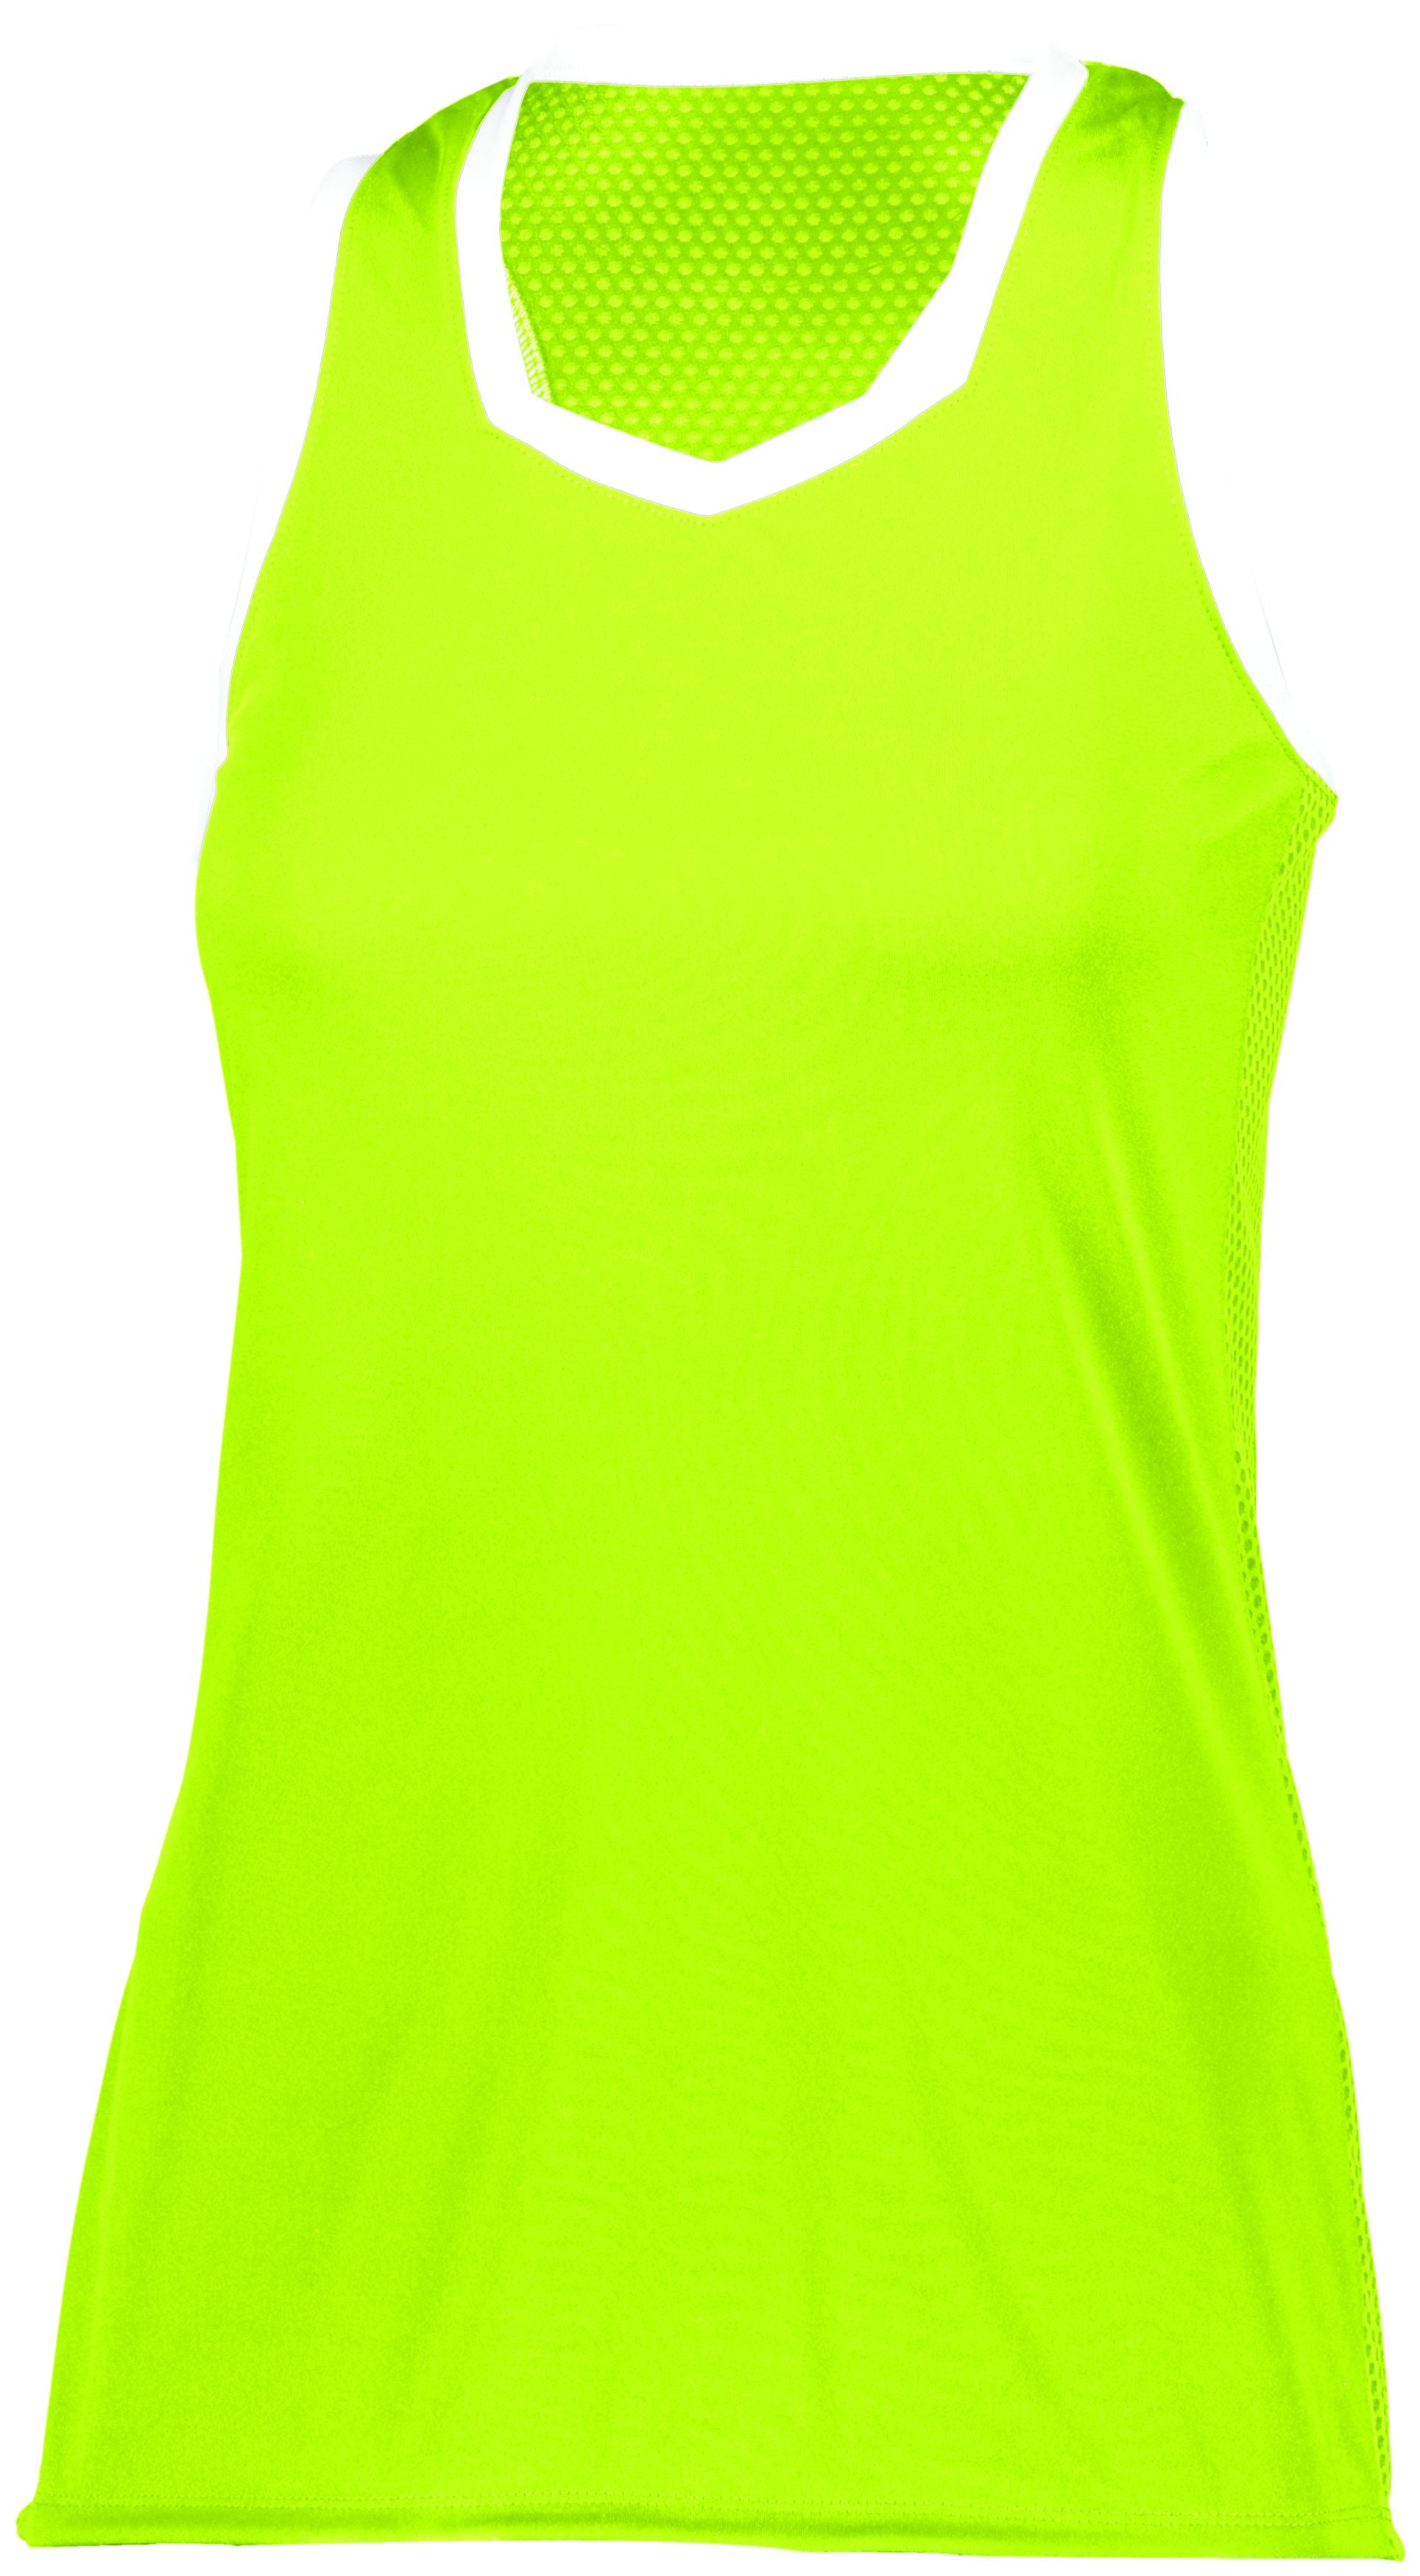 Augusta Sportswear Ladies Crosse Jersey in Lime/White  -Part of the Ladies, Ladies-Jersey, Augusta-Products, Shirts product lines at KanaleyCreations.com